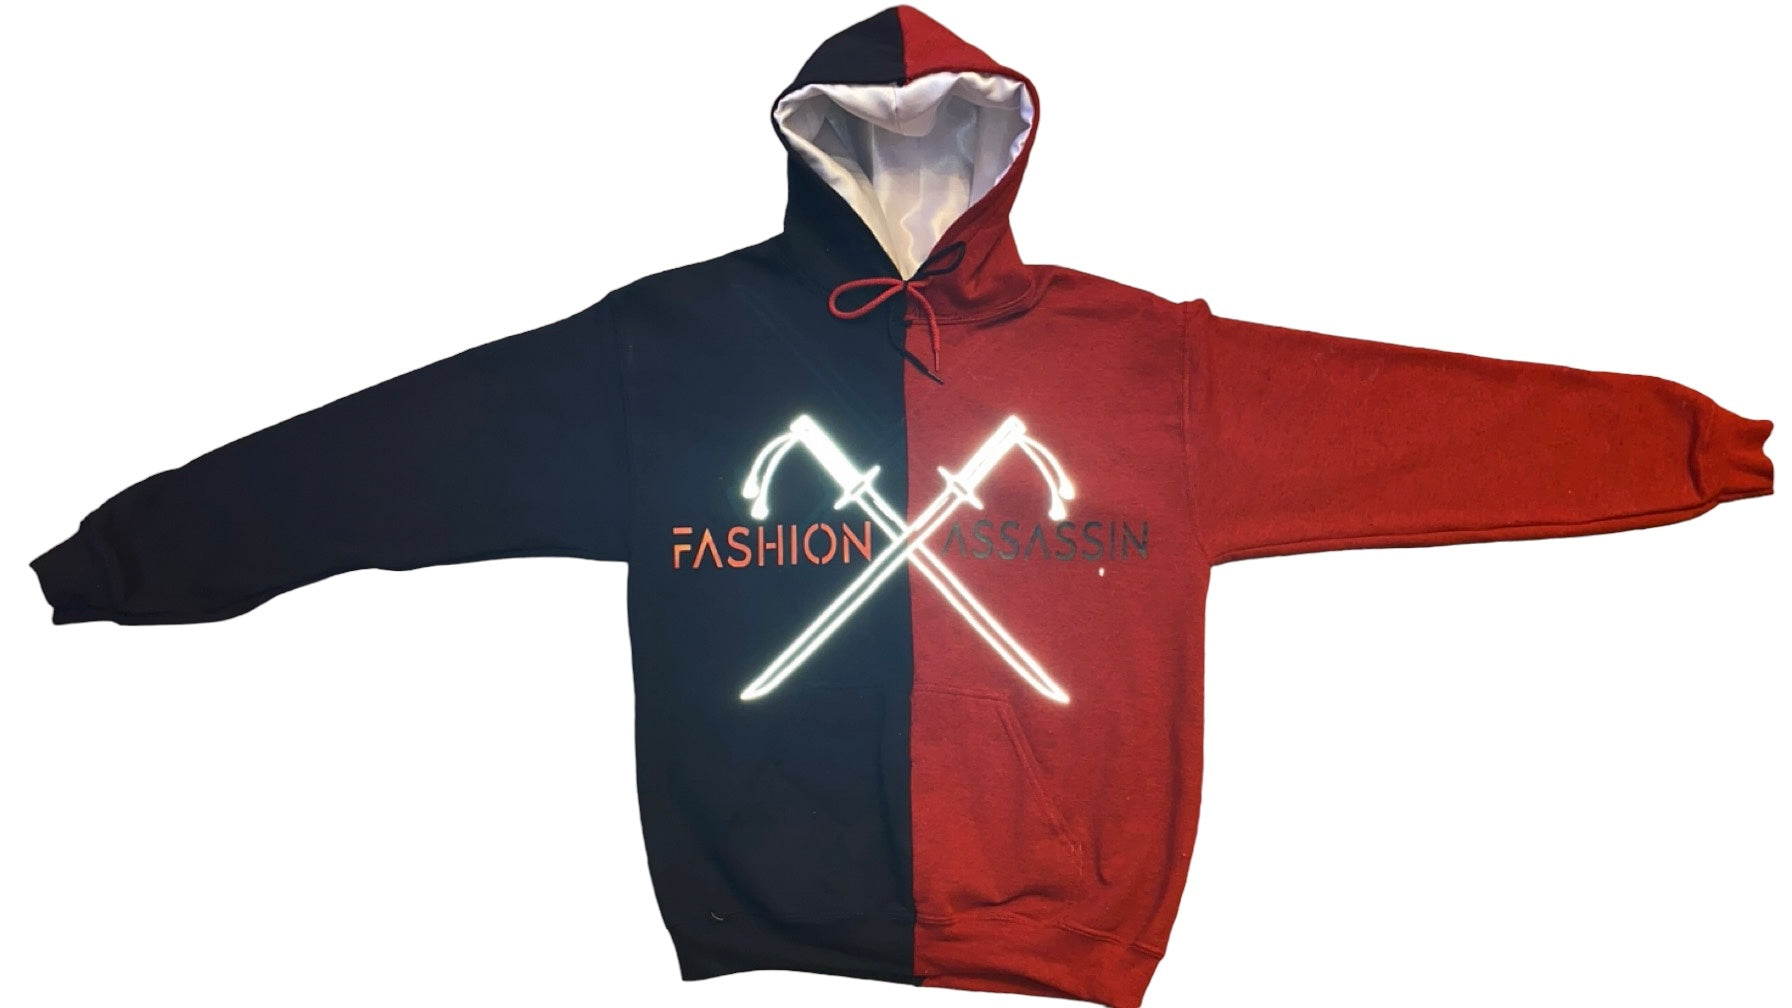 SCARFACE "Fashion Assassin" Hoodie